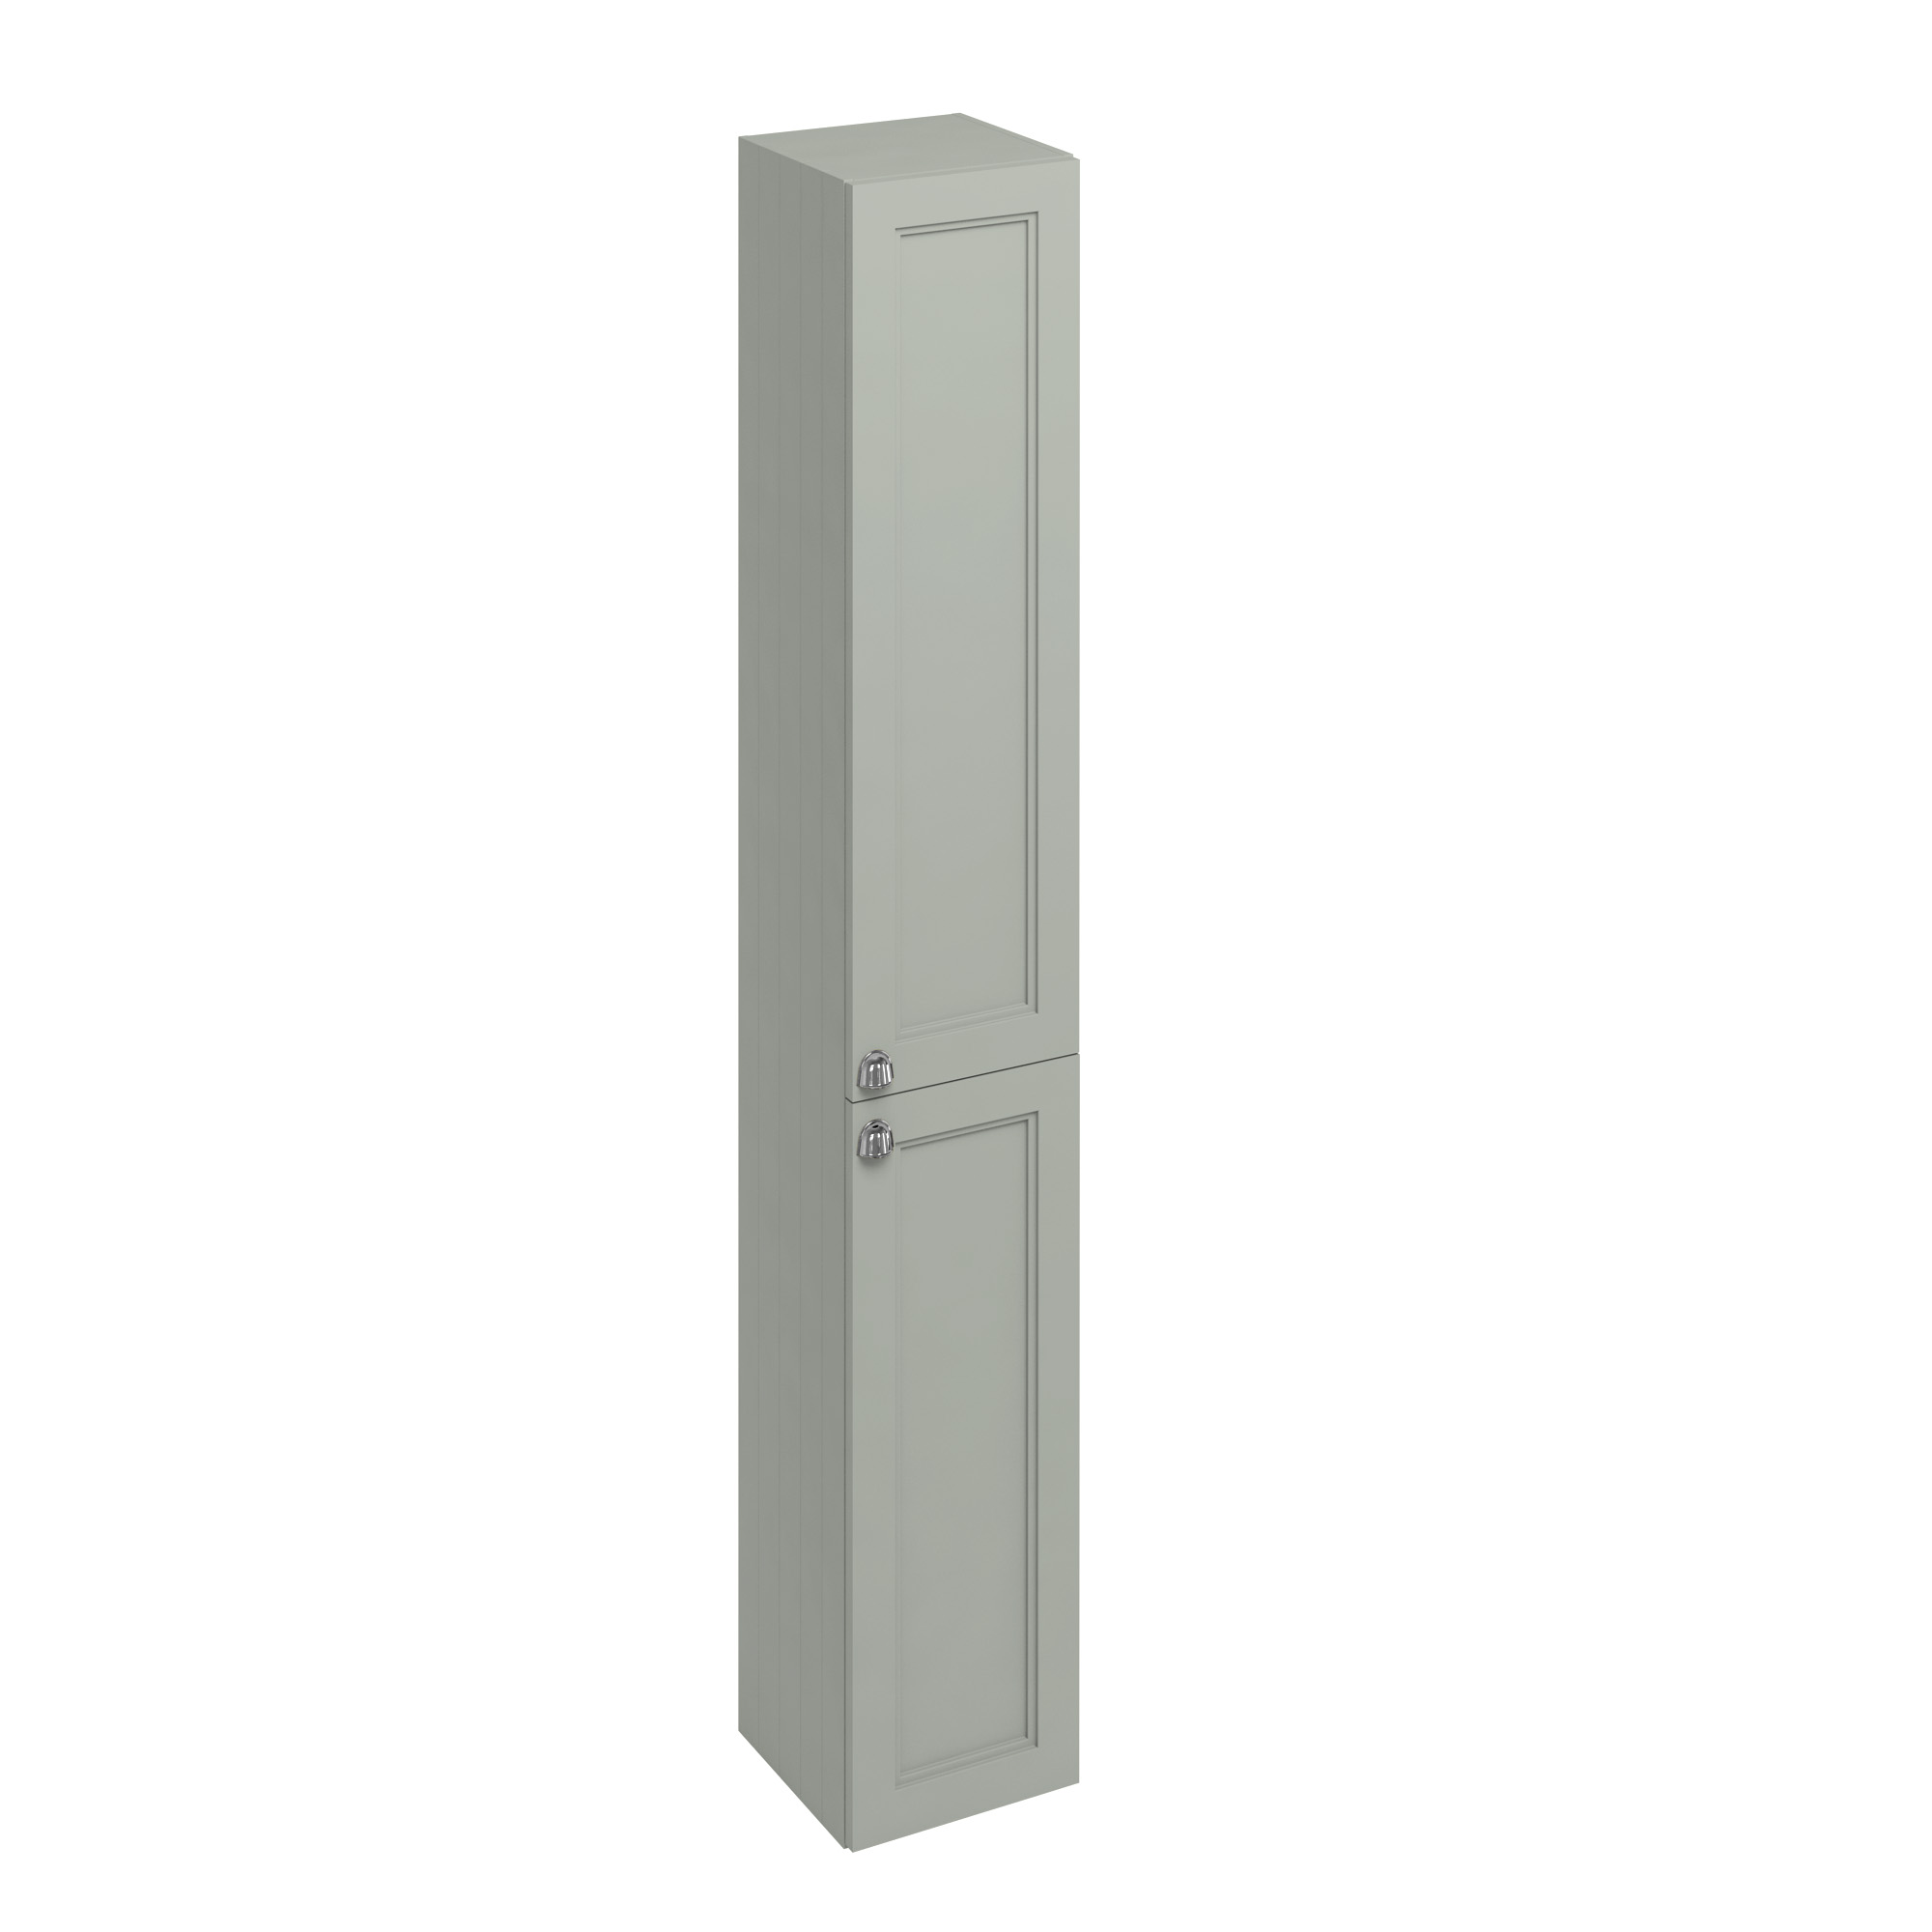 30cm Tall Two Door base unit